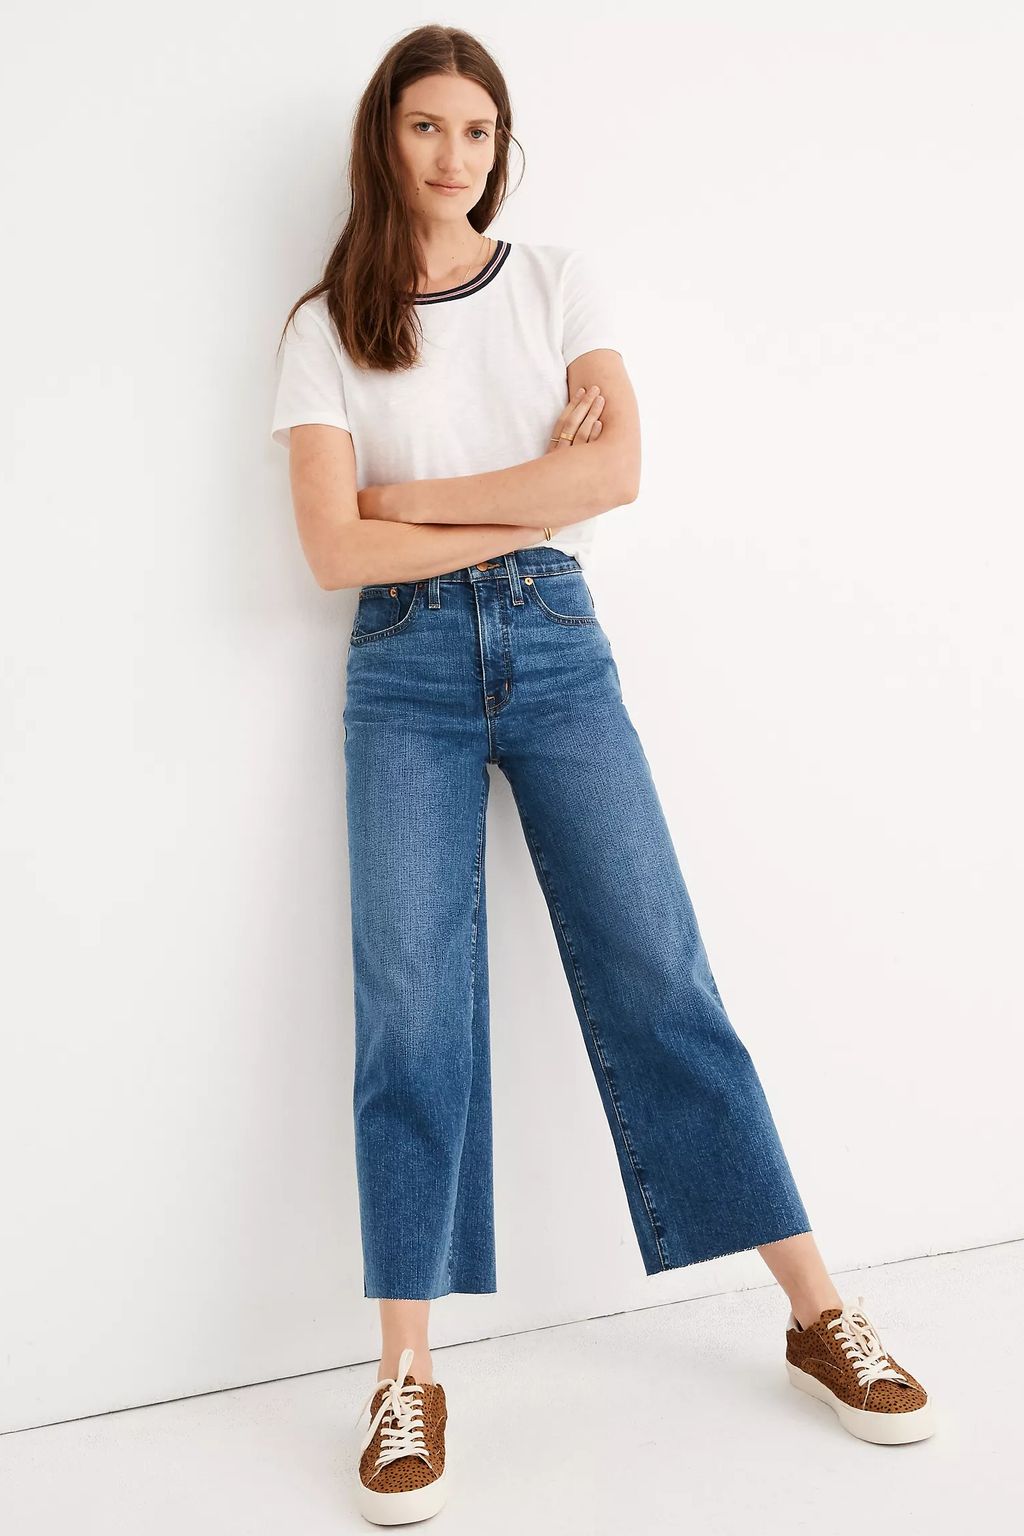 The 20 Best High-Waisted Jeans for Women in 2023 | Marie Claire